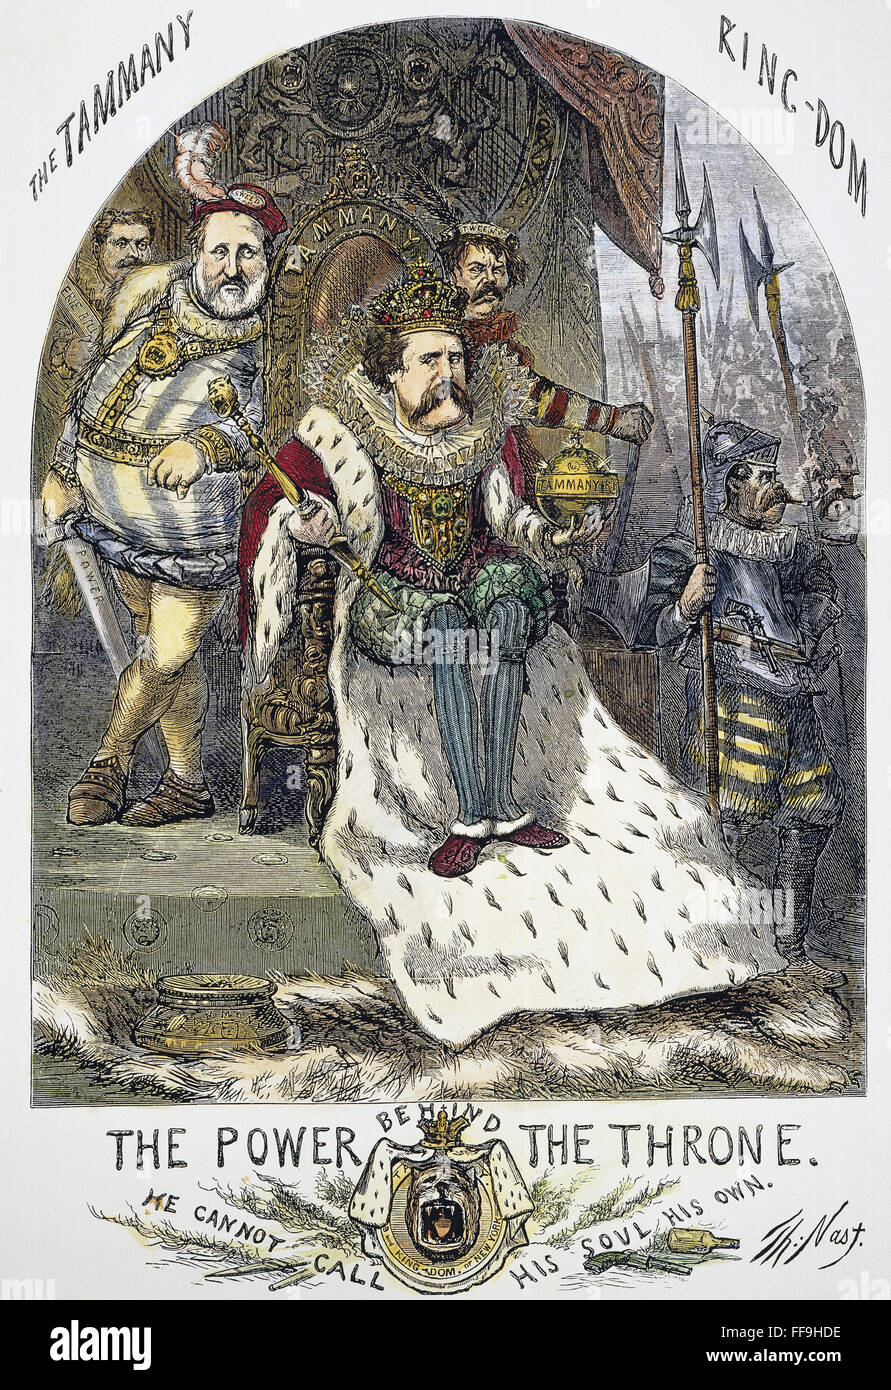 NAST: TWEED CARTOON, 1870. /n'The Power Behind the Throne.' An 1870 cartoon by Thomas Nast attacking 'Boss' William M. Tweed as the sinister power behind the throne of Governor John T. Hoffman of New York. Stock Photo